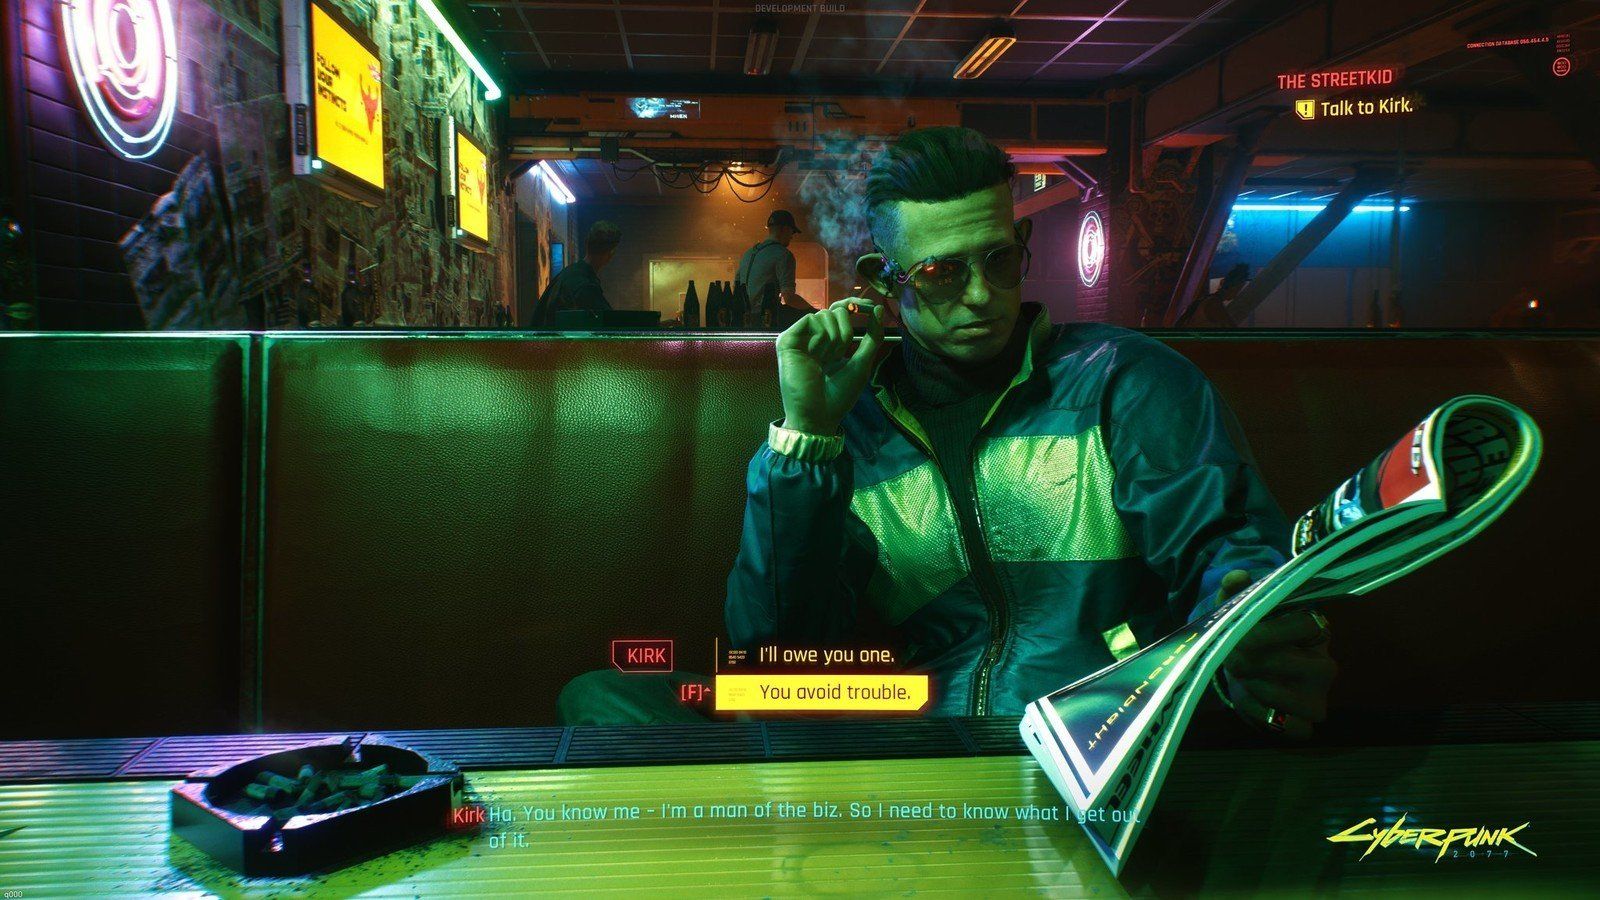 Cyberpunk 2077 preorder: Editions, bonuses, and which to buy